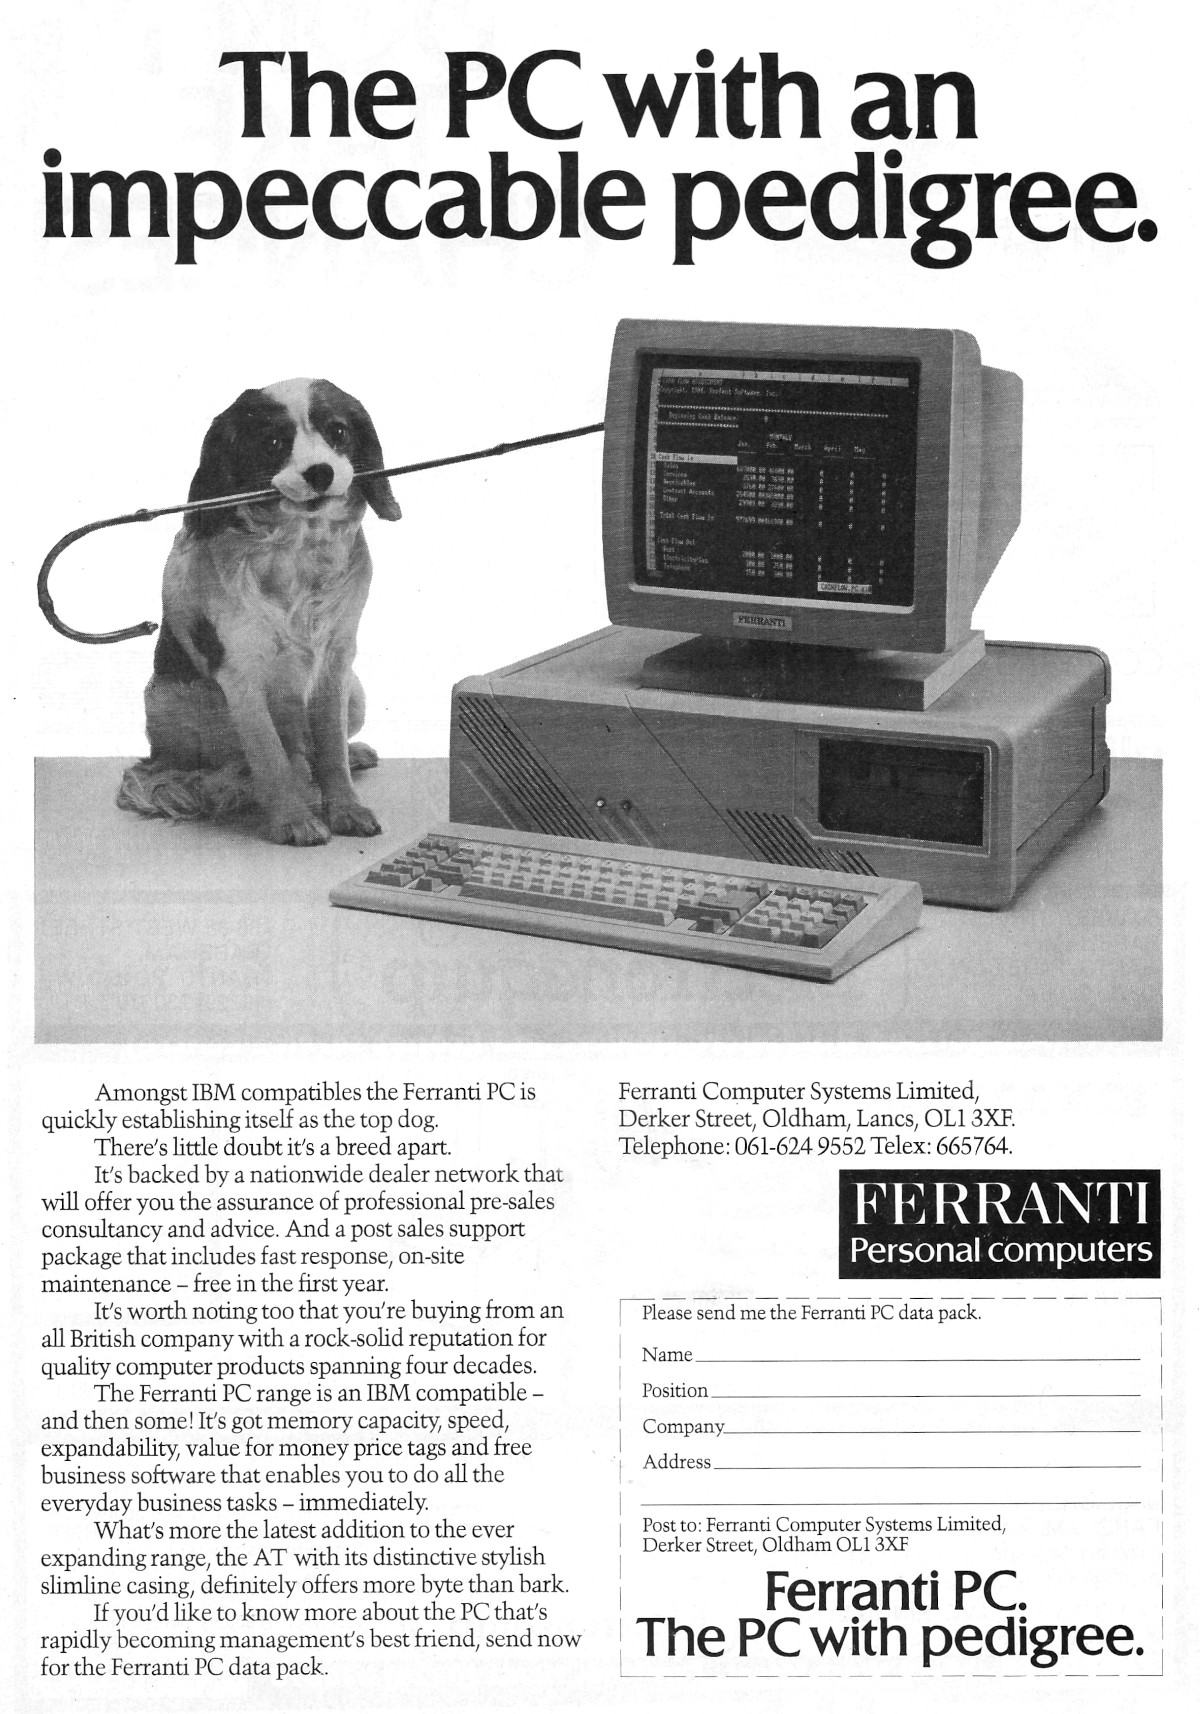 The original Ferranti PC AT, from <span class='hilite'>Practical Computing</span>, June 1986. Note the clear dig at IBM, with the dog holding Charlie Chaplin's cane in its mouth.